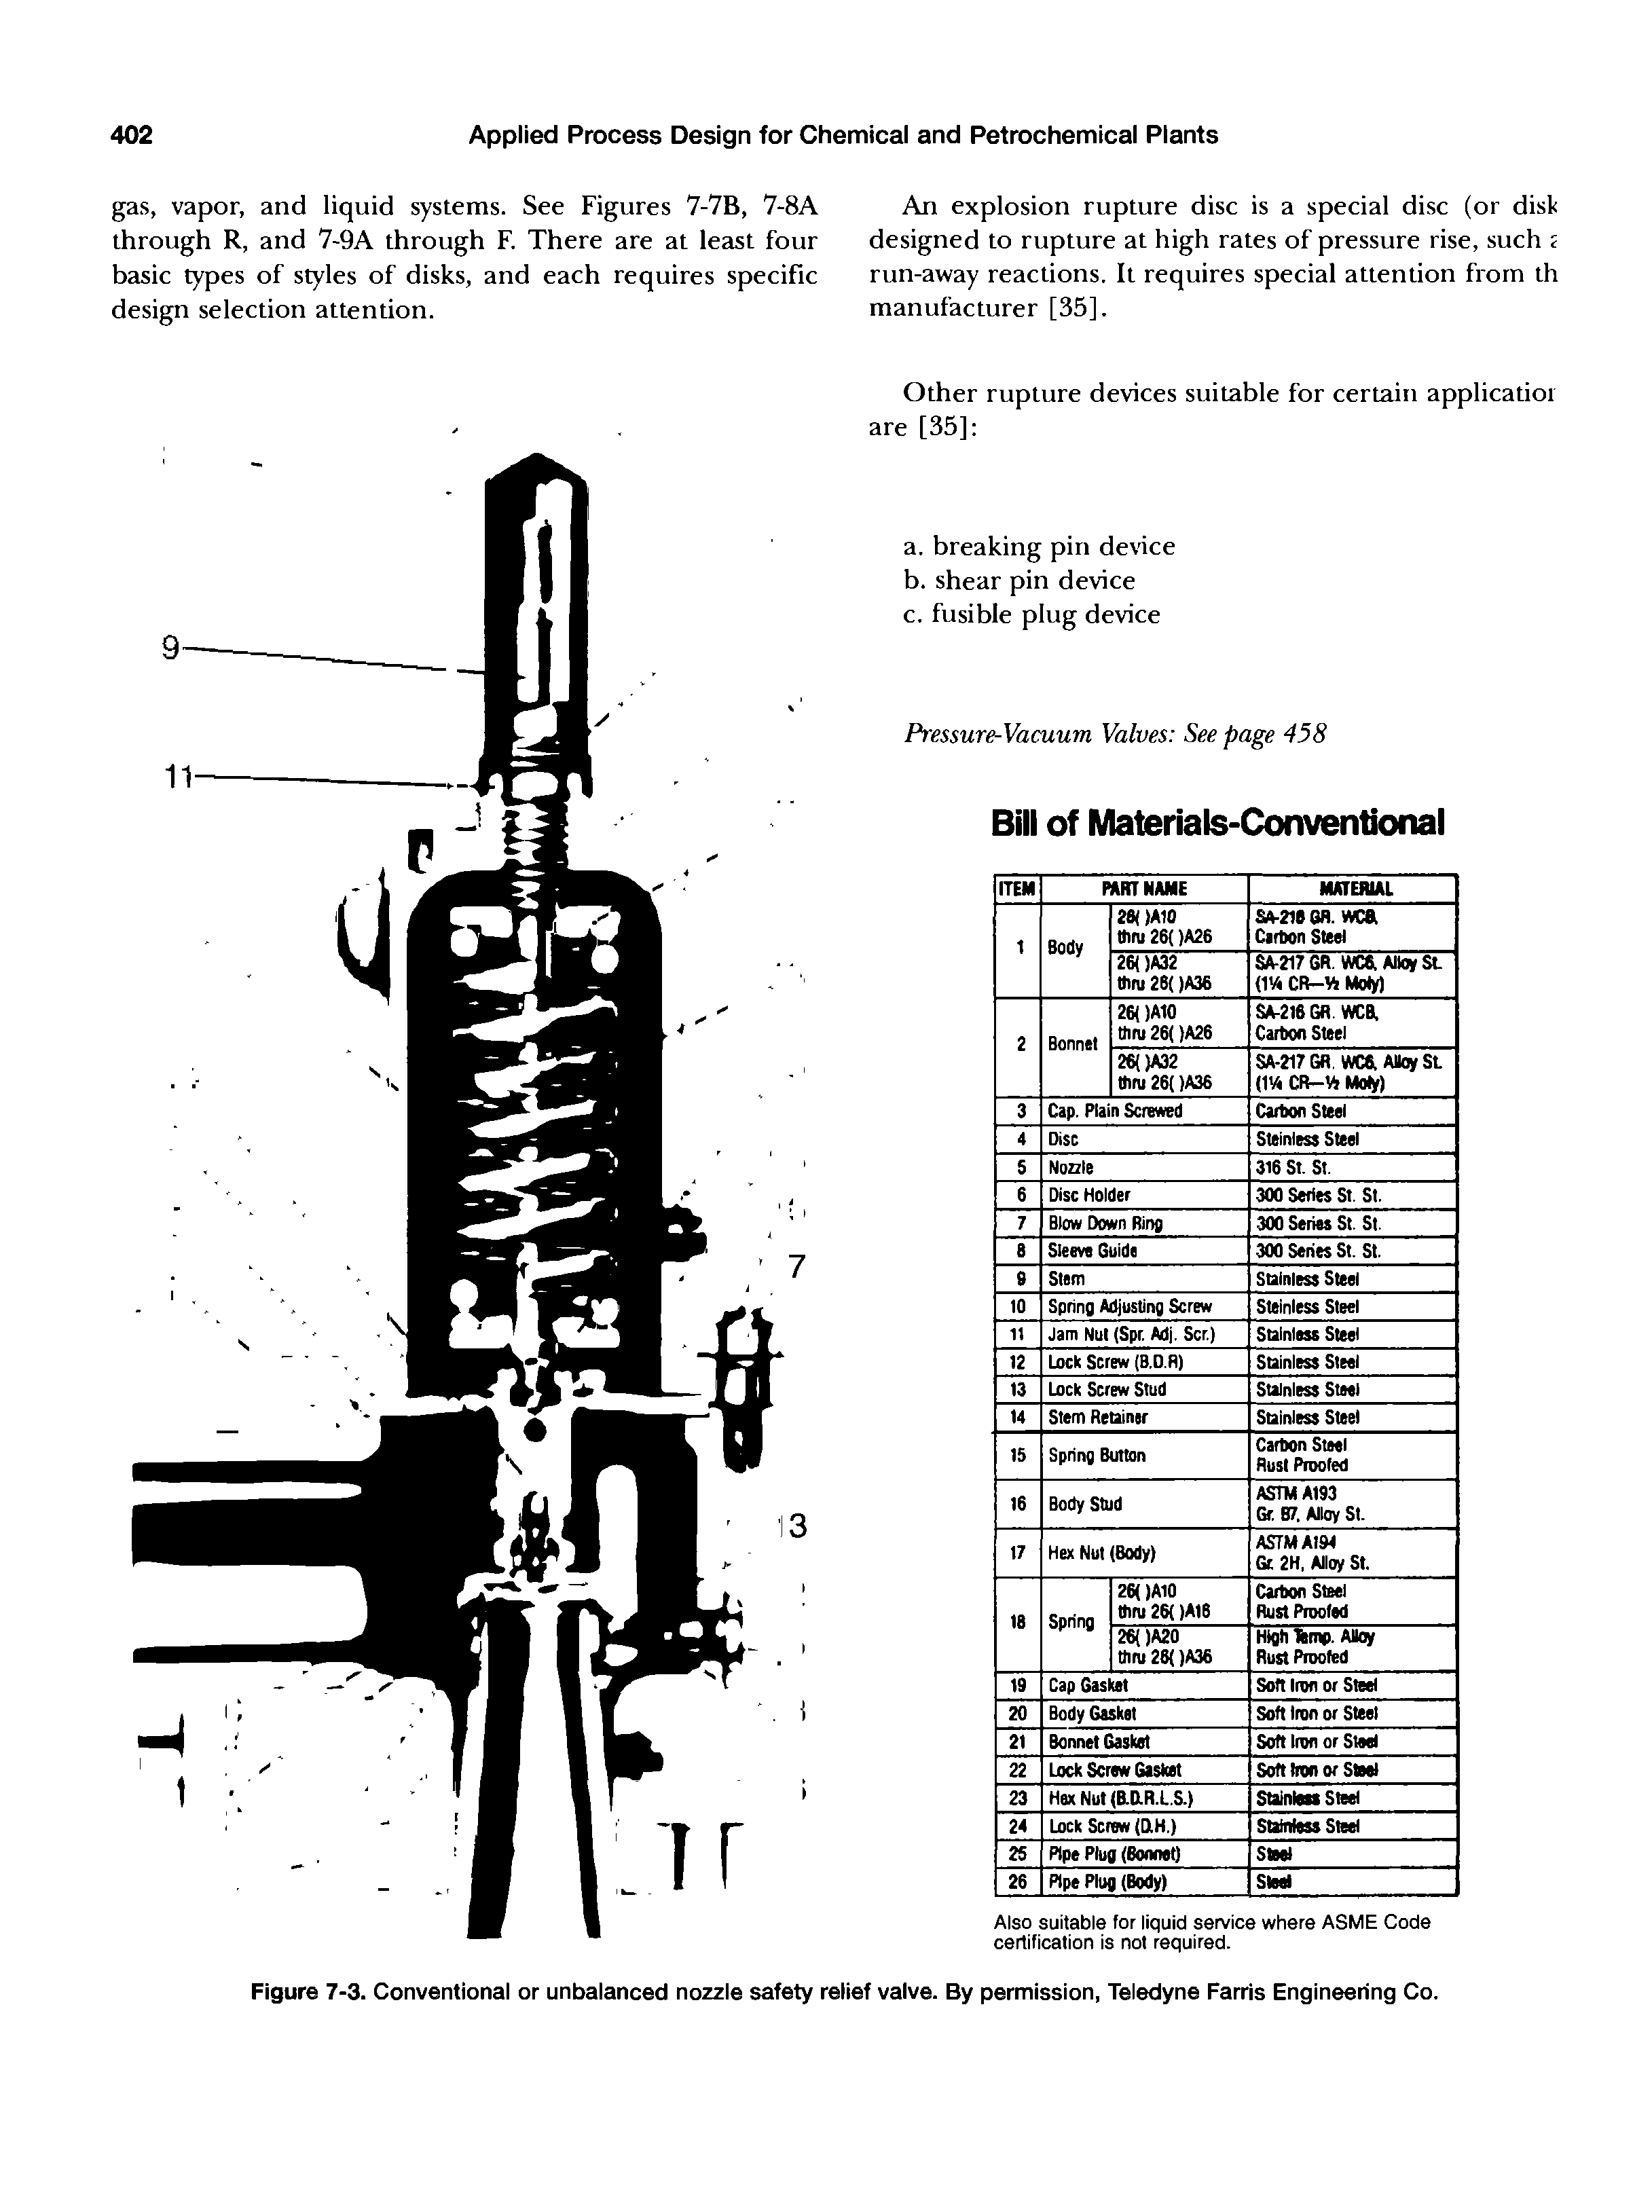 Figure 7-3. Conventional or unbalanced nozzle safety relief valve. By permission. Teledyne Farris Engineering Co.